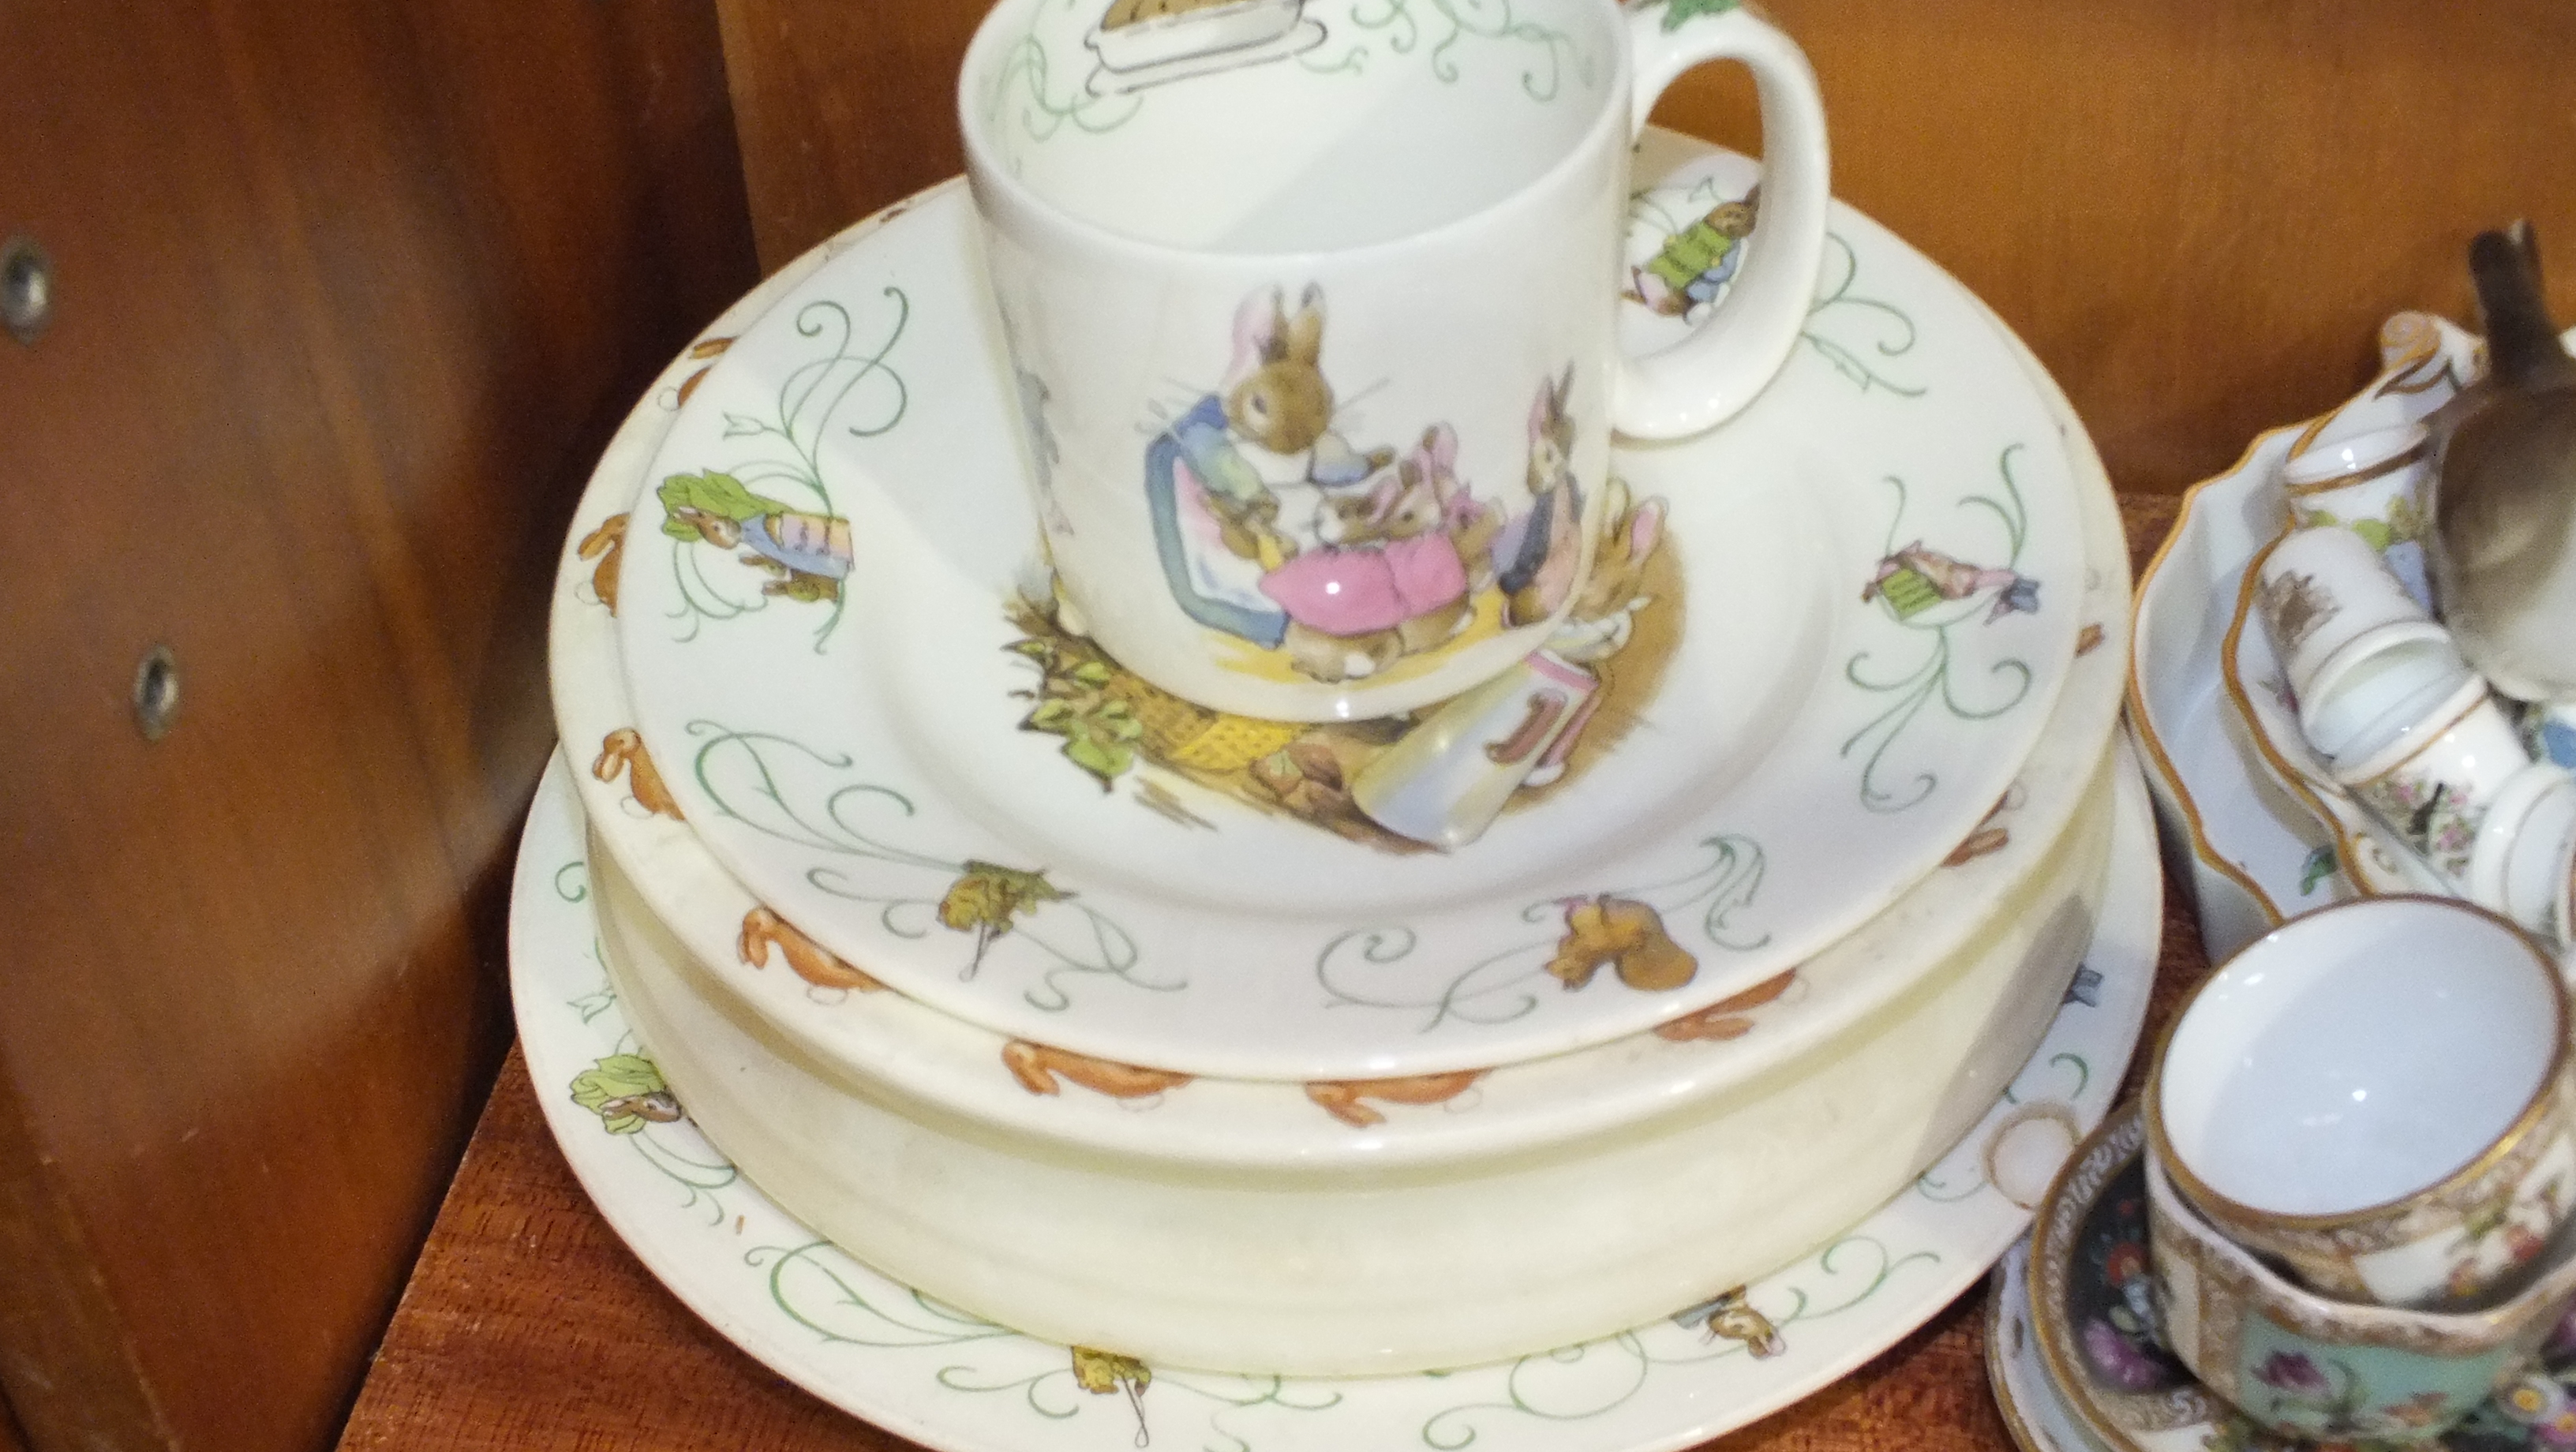 A mid-19th century English porcelain egg cup stand with six matching egg cups (one broken), on paw - Image 3 of 4